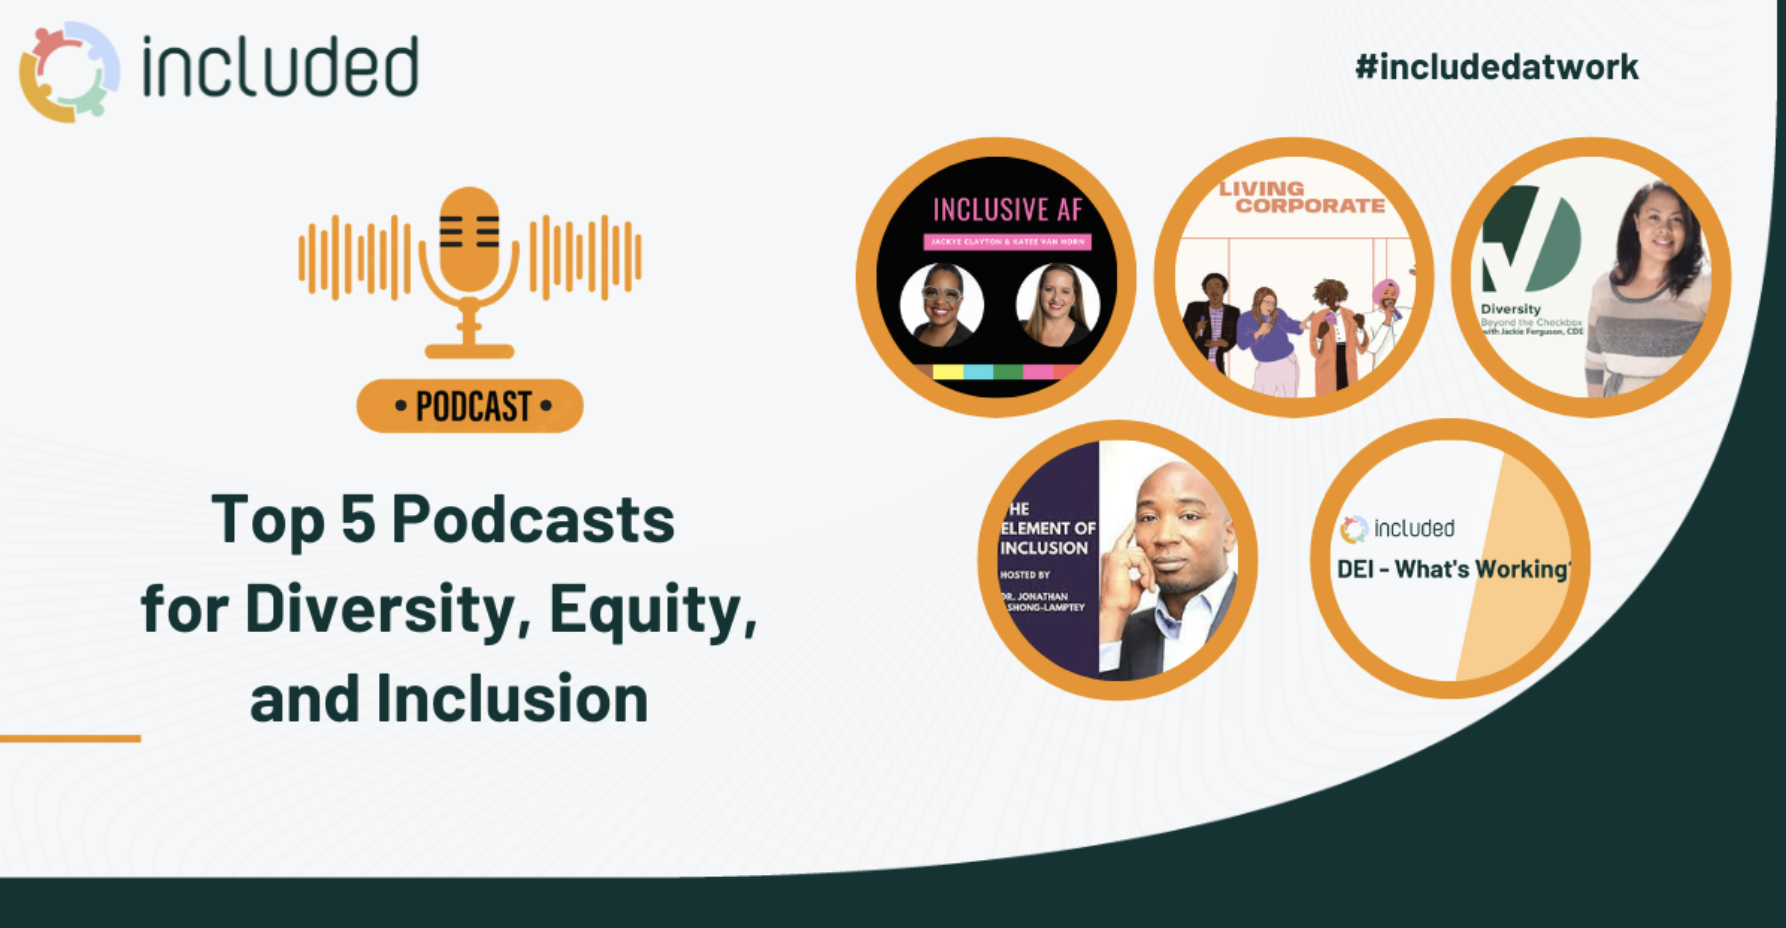 Top 5 DEI Podcasts for Diversity, Equity, and Inclusion